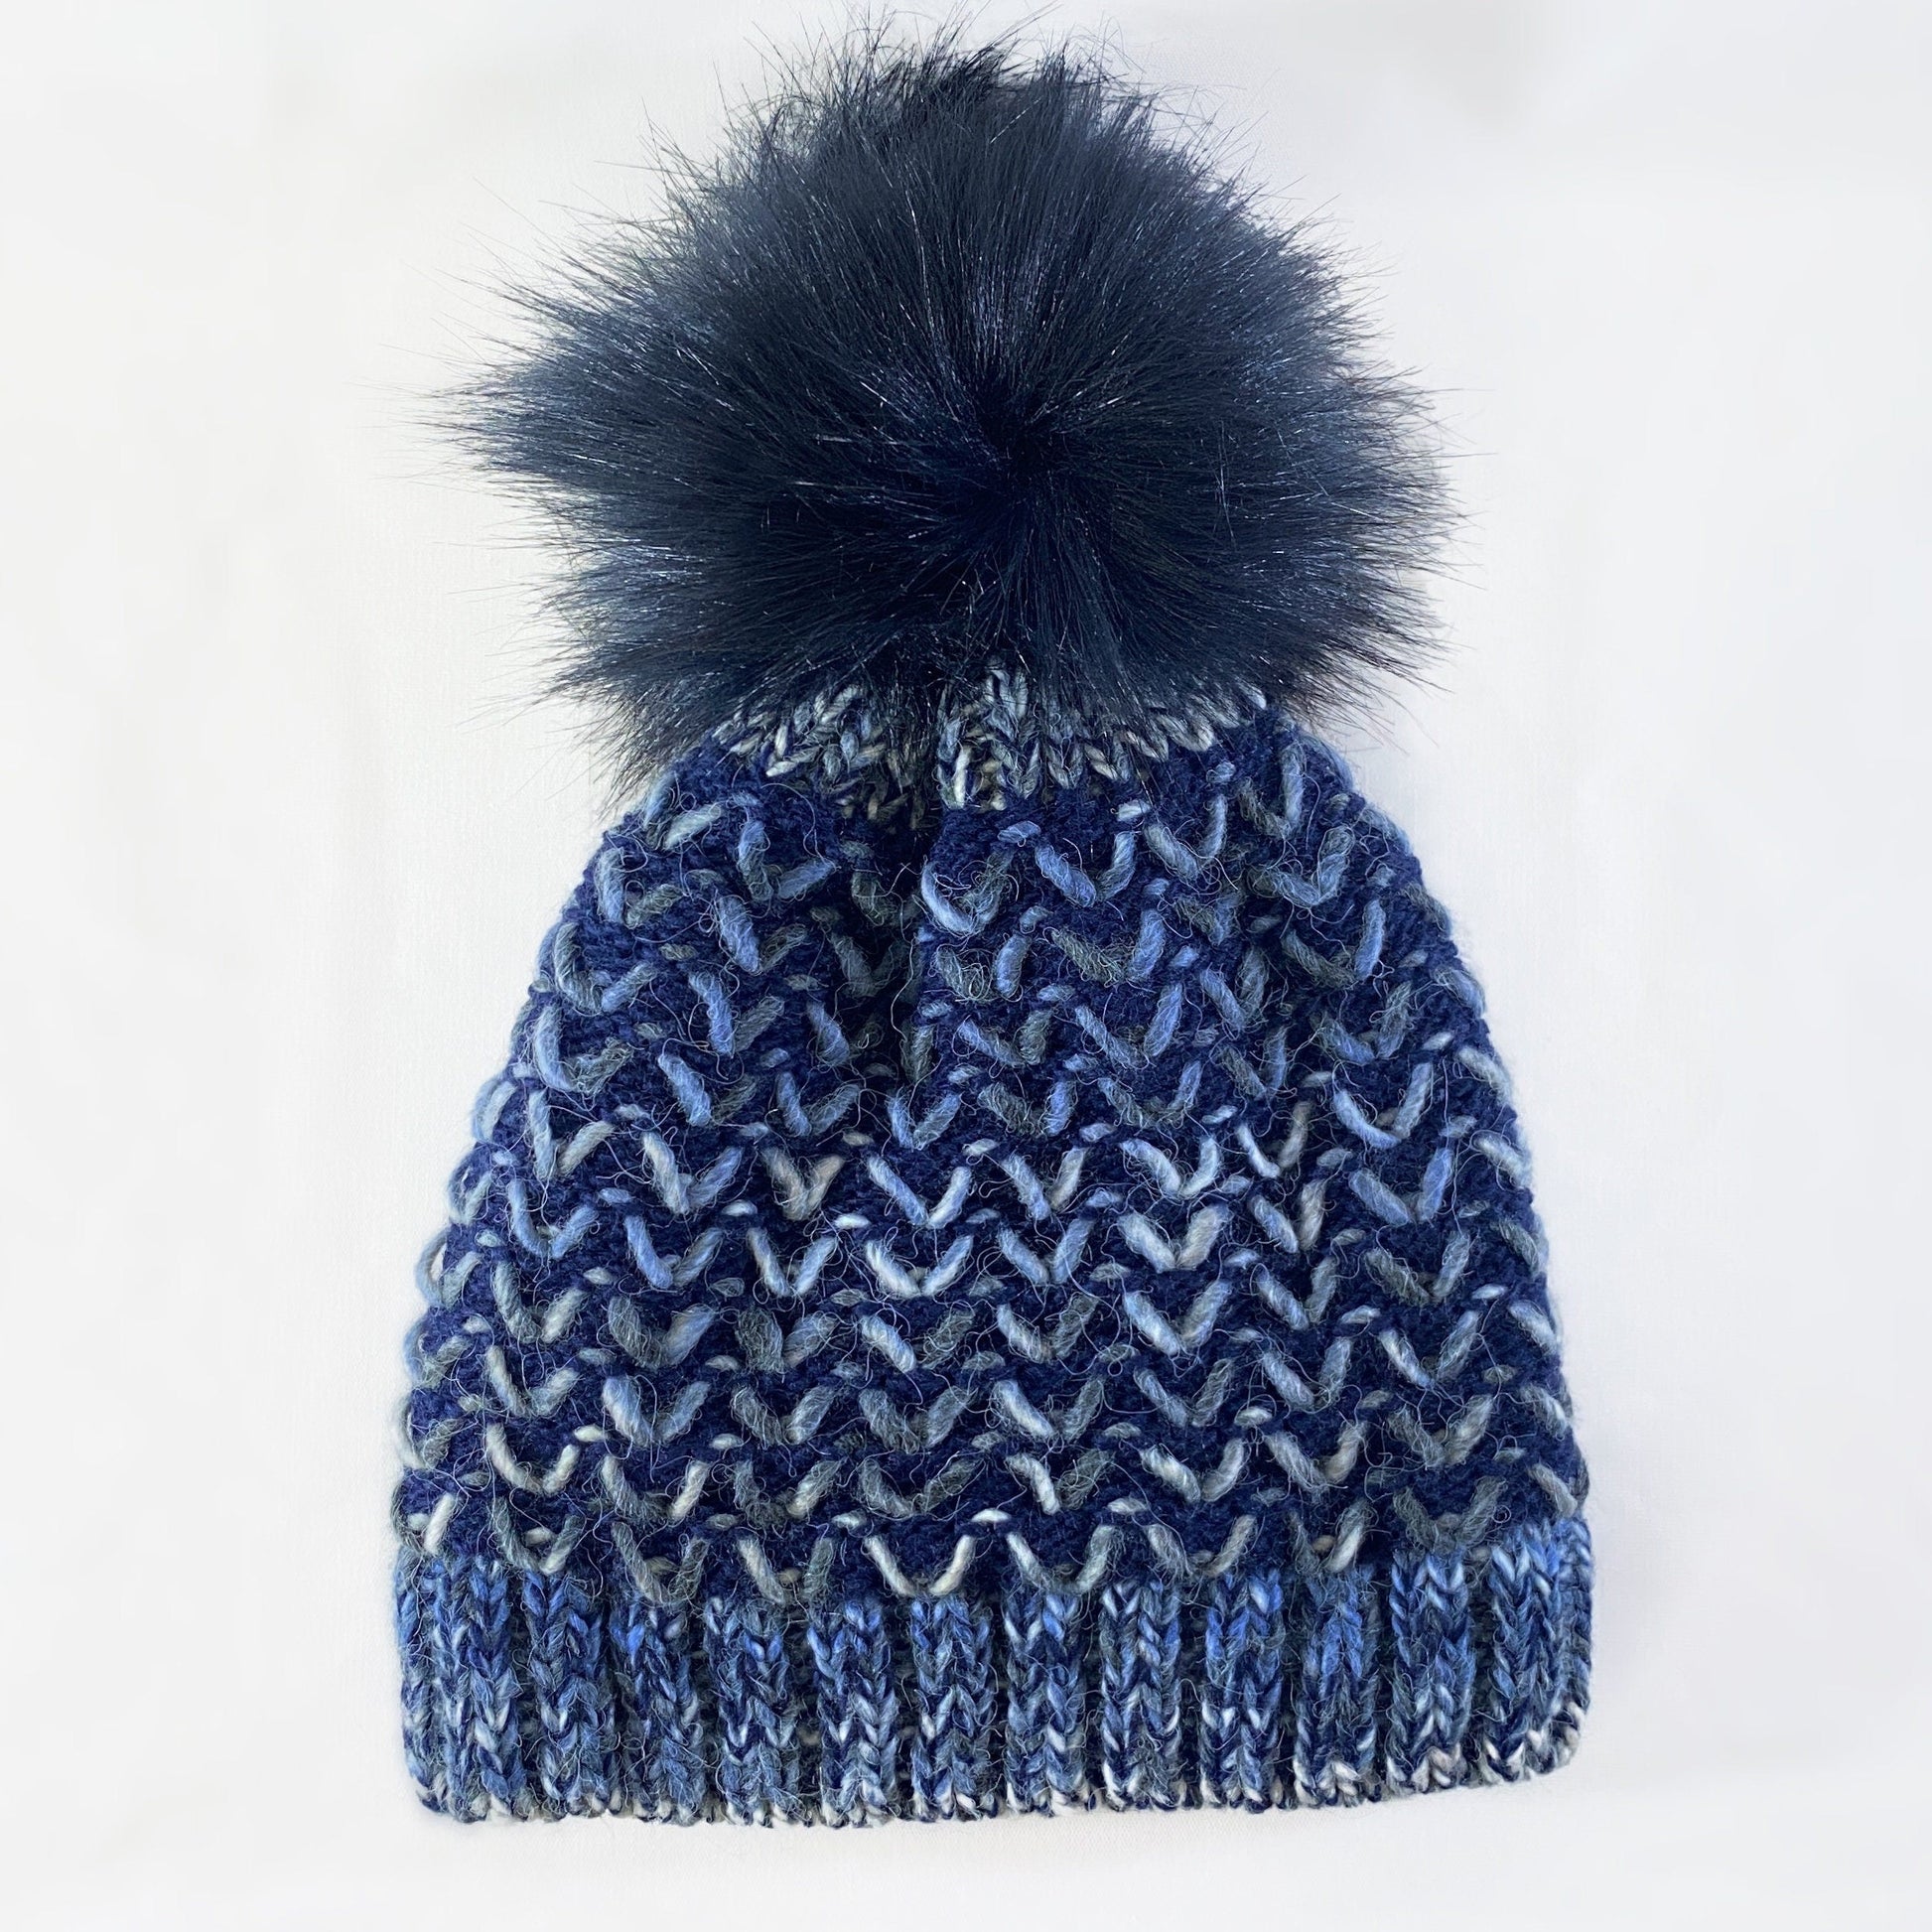 Blue Winter Beanie With Pompom - Made From Italian Wool, Acrylic Yarn, and Faux Fur